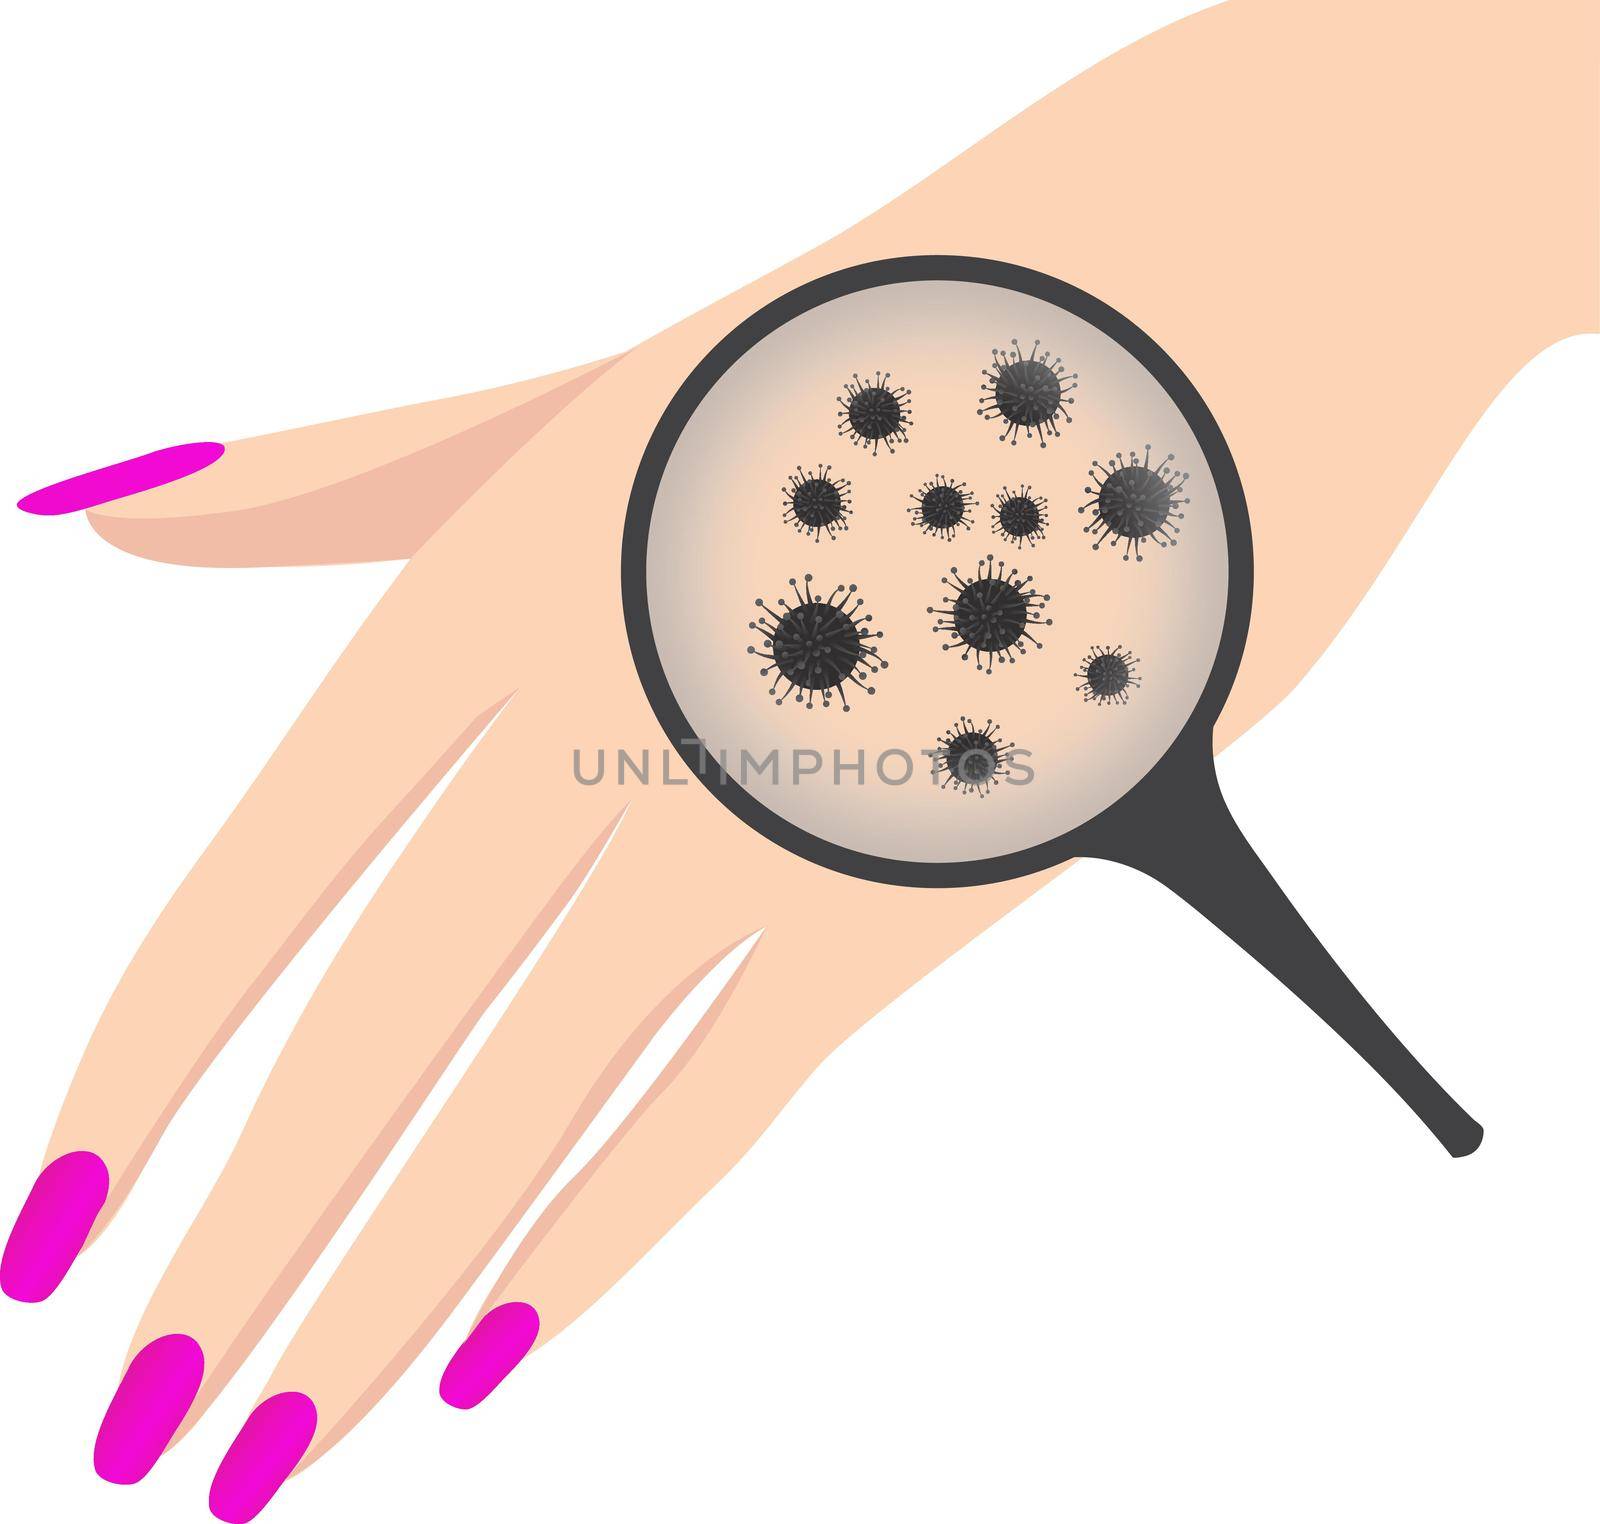 corona virus on hands antiseptic and disinfection concept vector illustration on a white background isolated